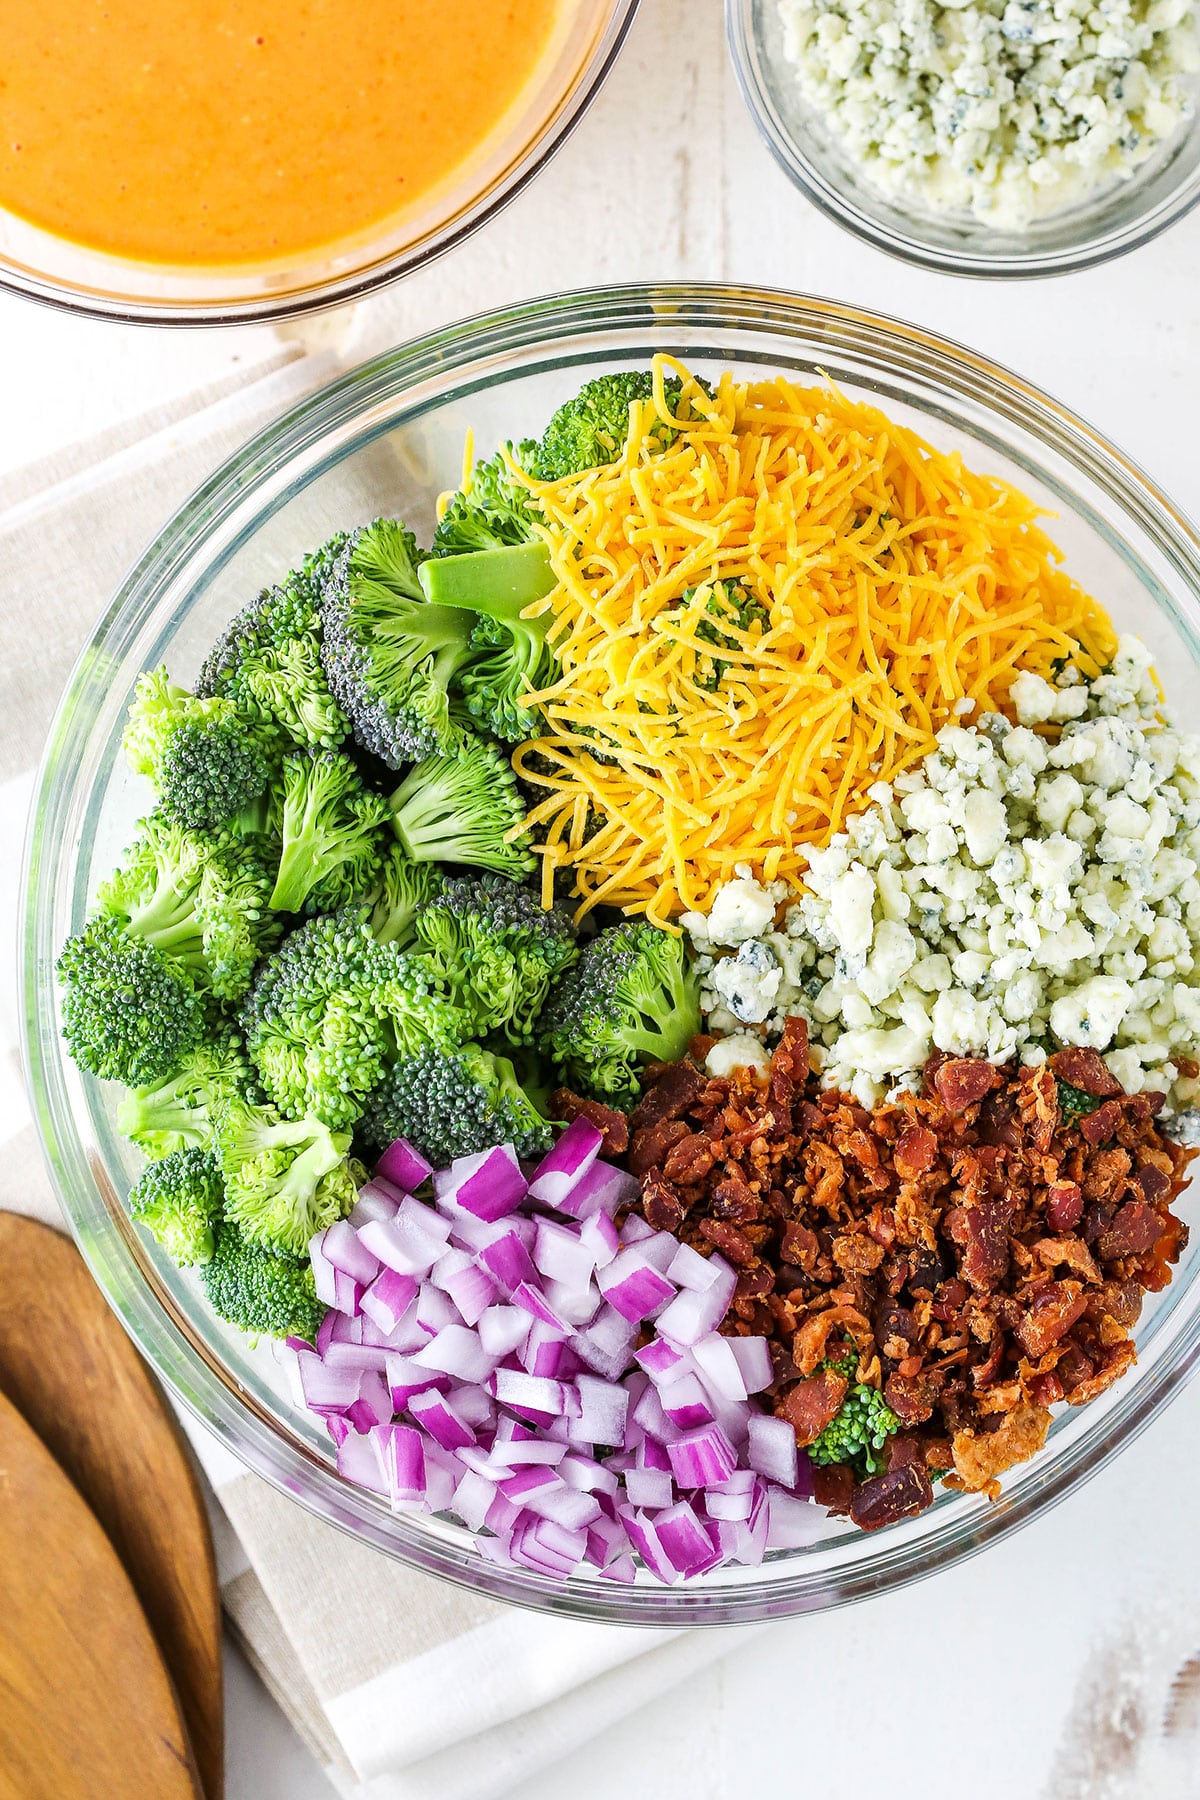 Buffalo Broccoli Salad ingredients in a clear glass bowl on a white table